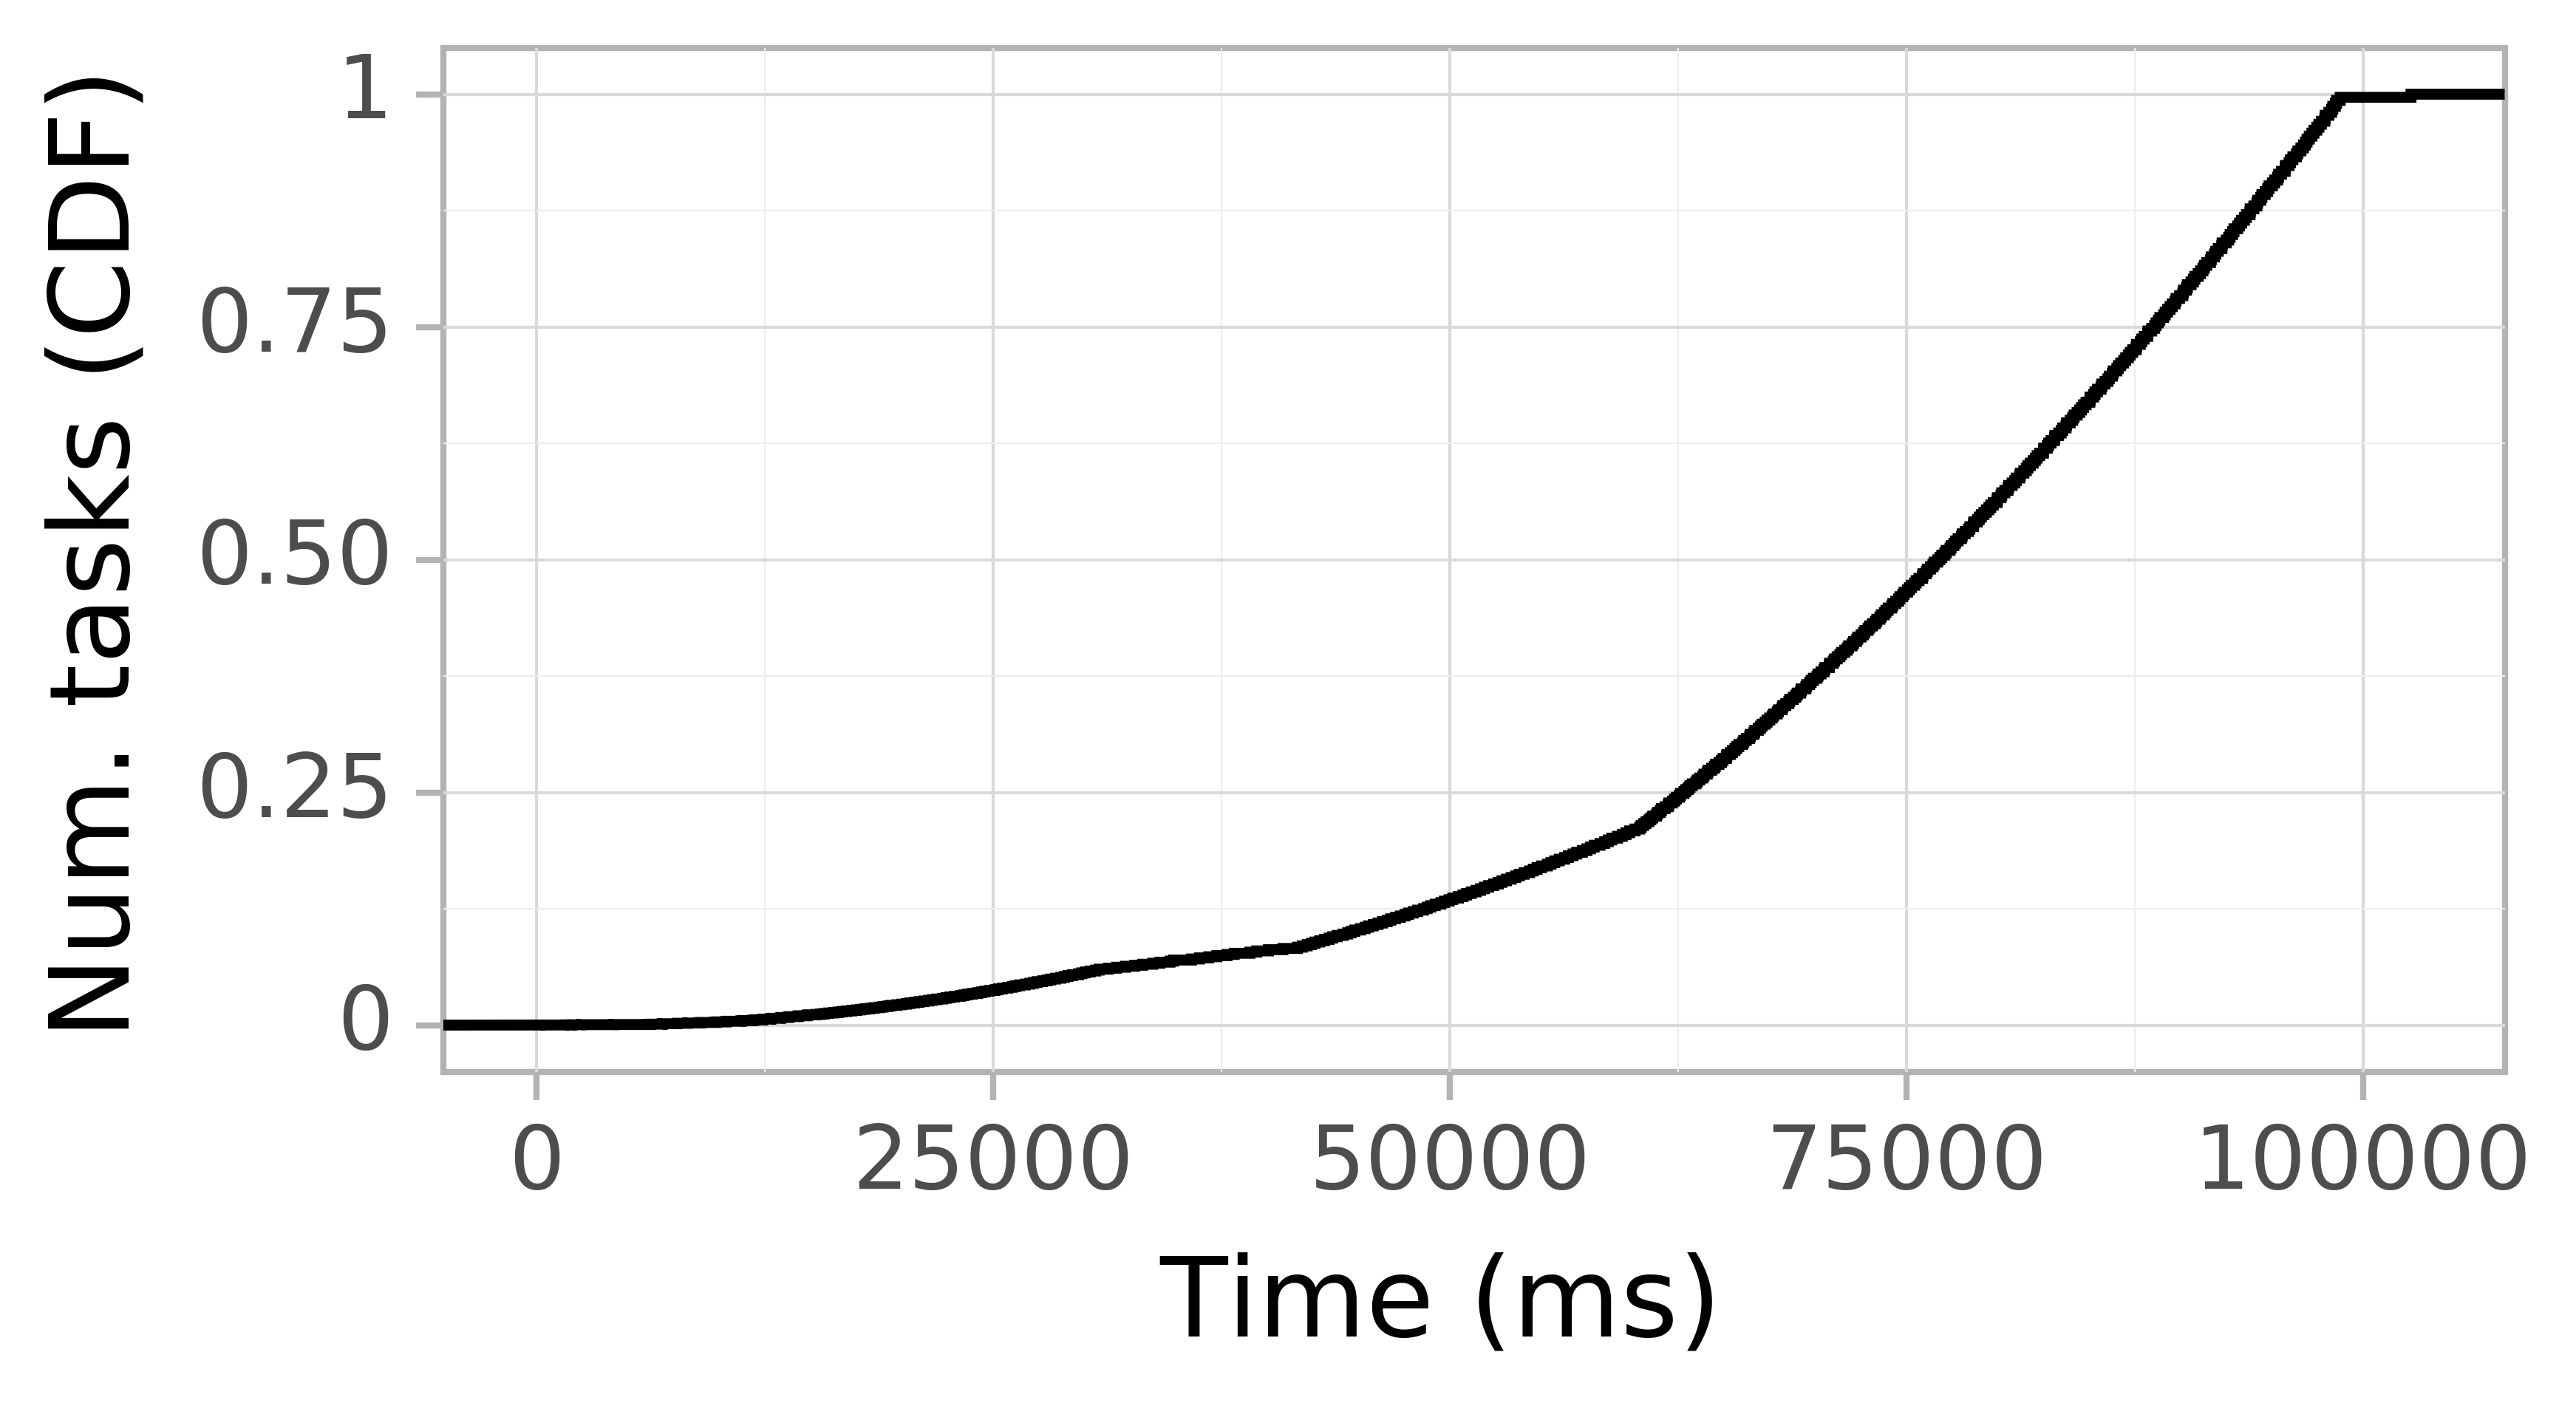 Task arrival CDF graph for the Pegasus_P2 trace.